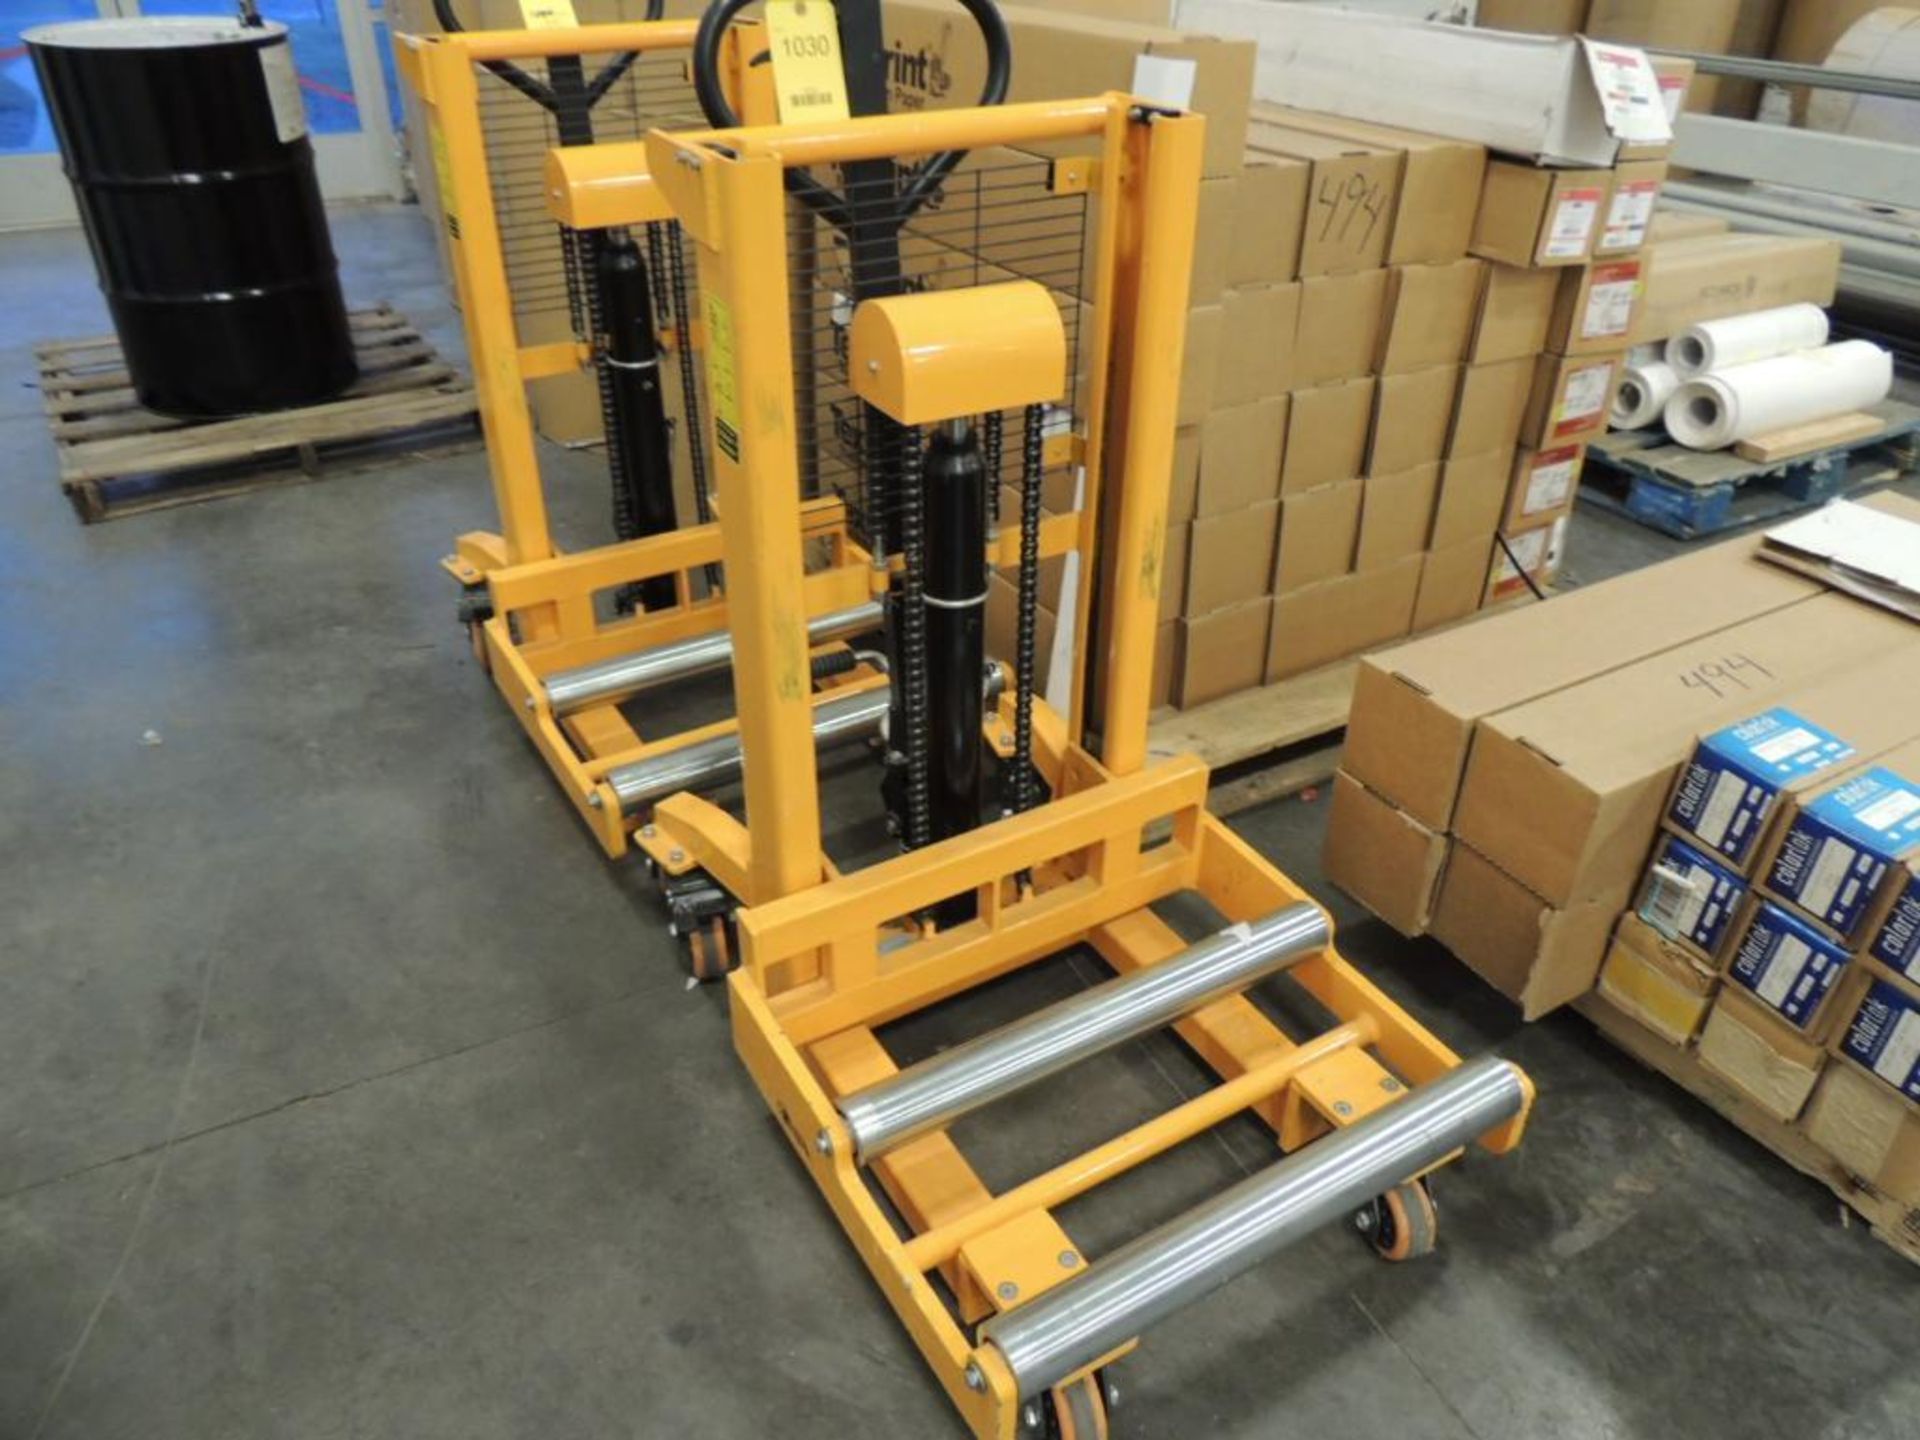 Foster 1540 lb. On-A-Roll Model 61592 Lifter